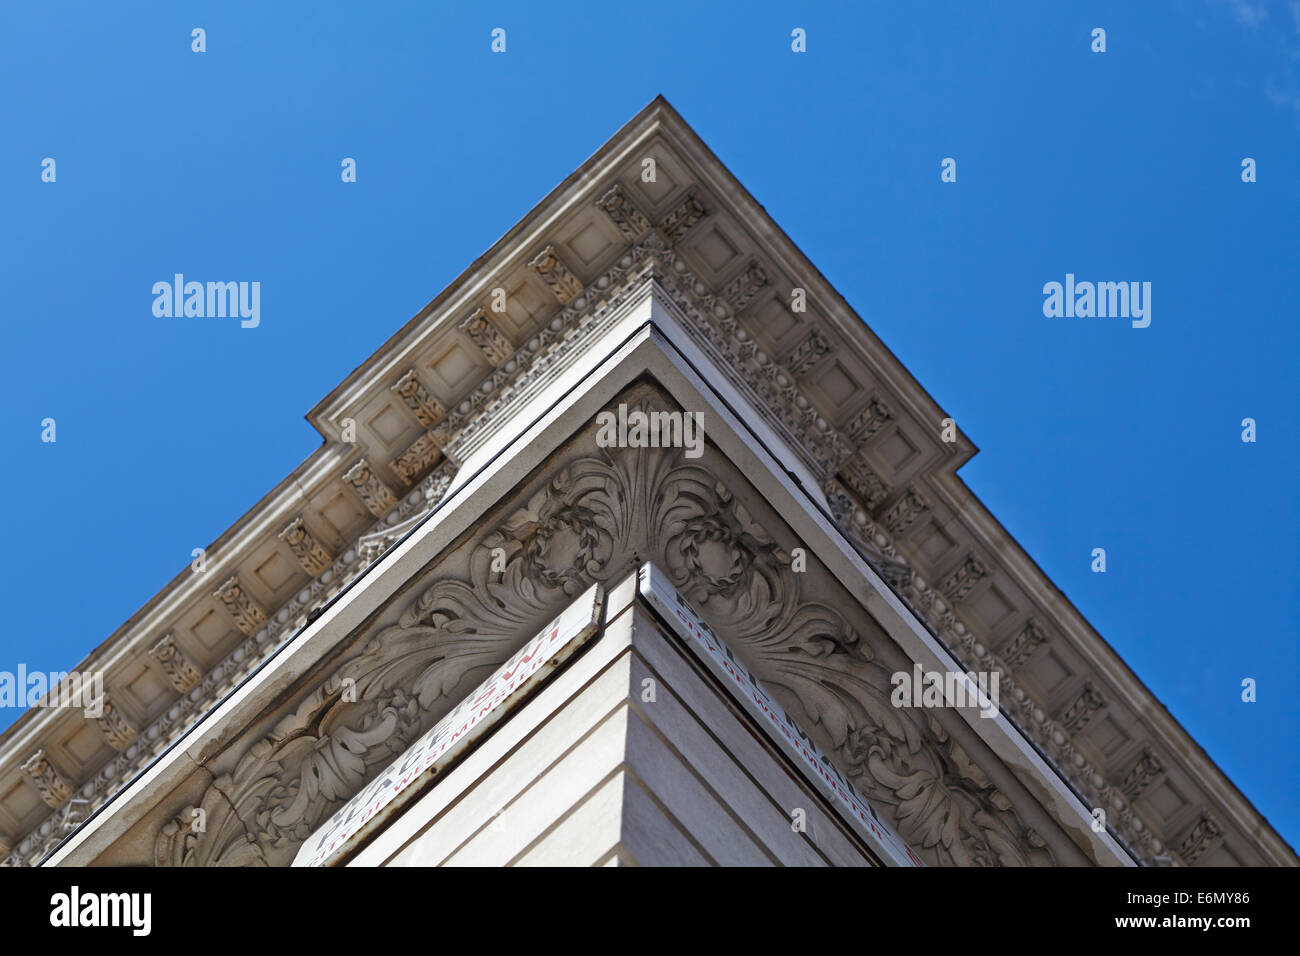 London textures, typical grey stone building detail. Stock Photo